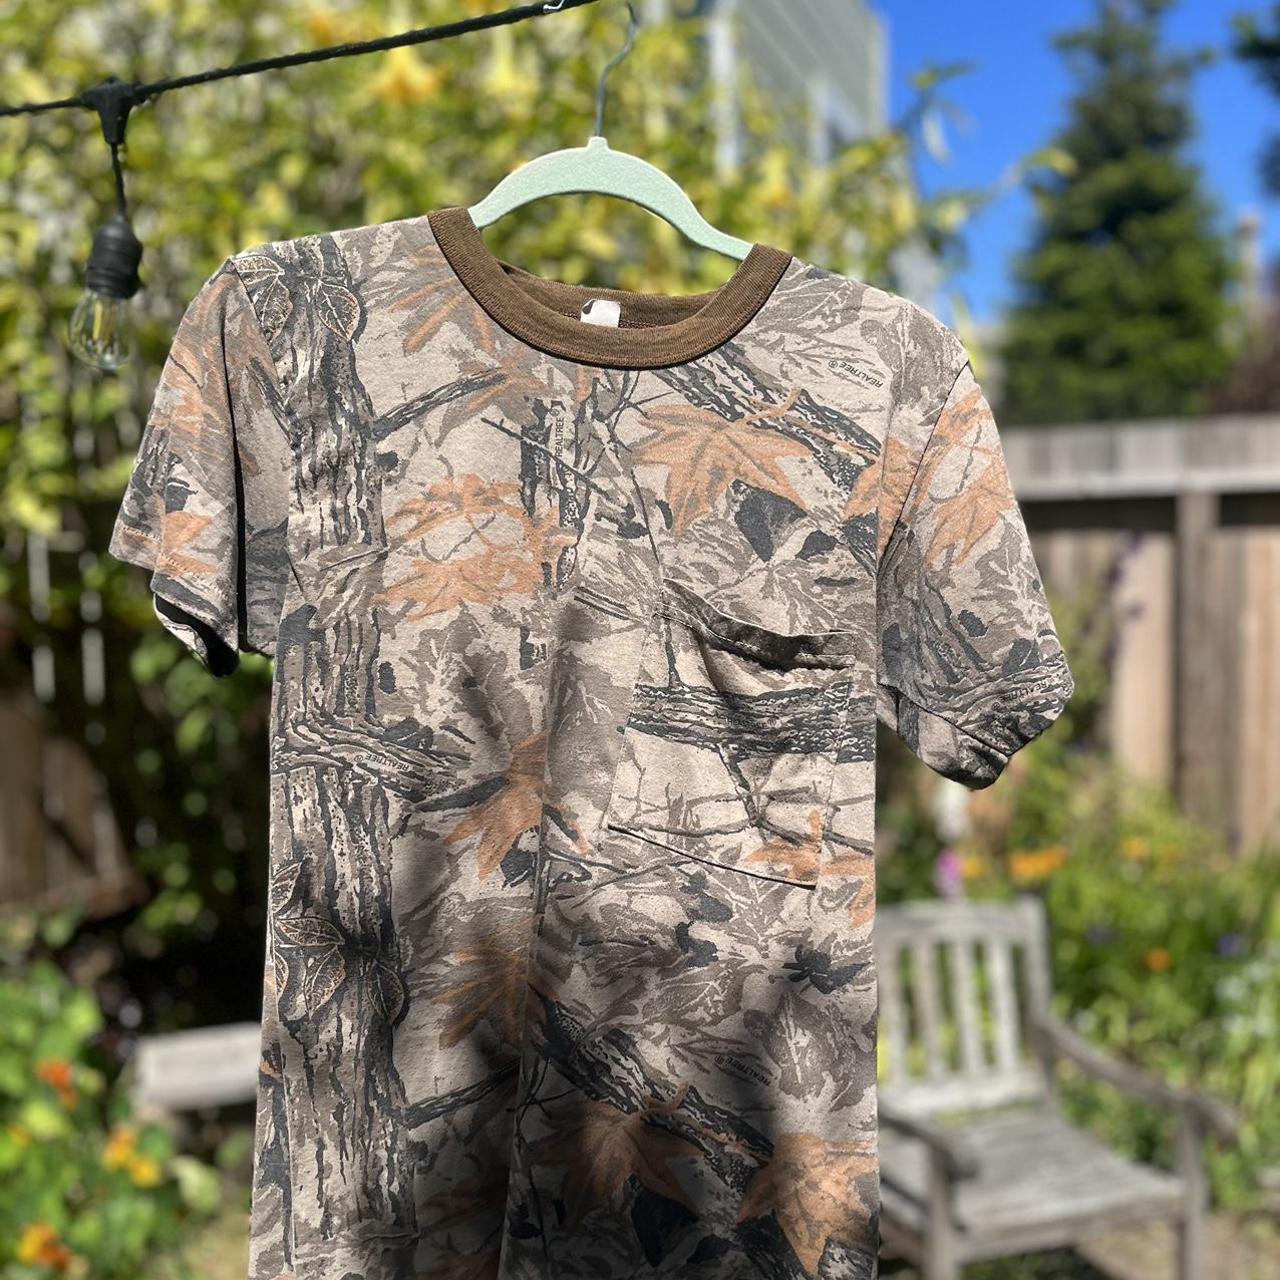 Realtree camouflage pocket T shirt, #camo #camouflage